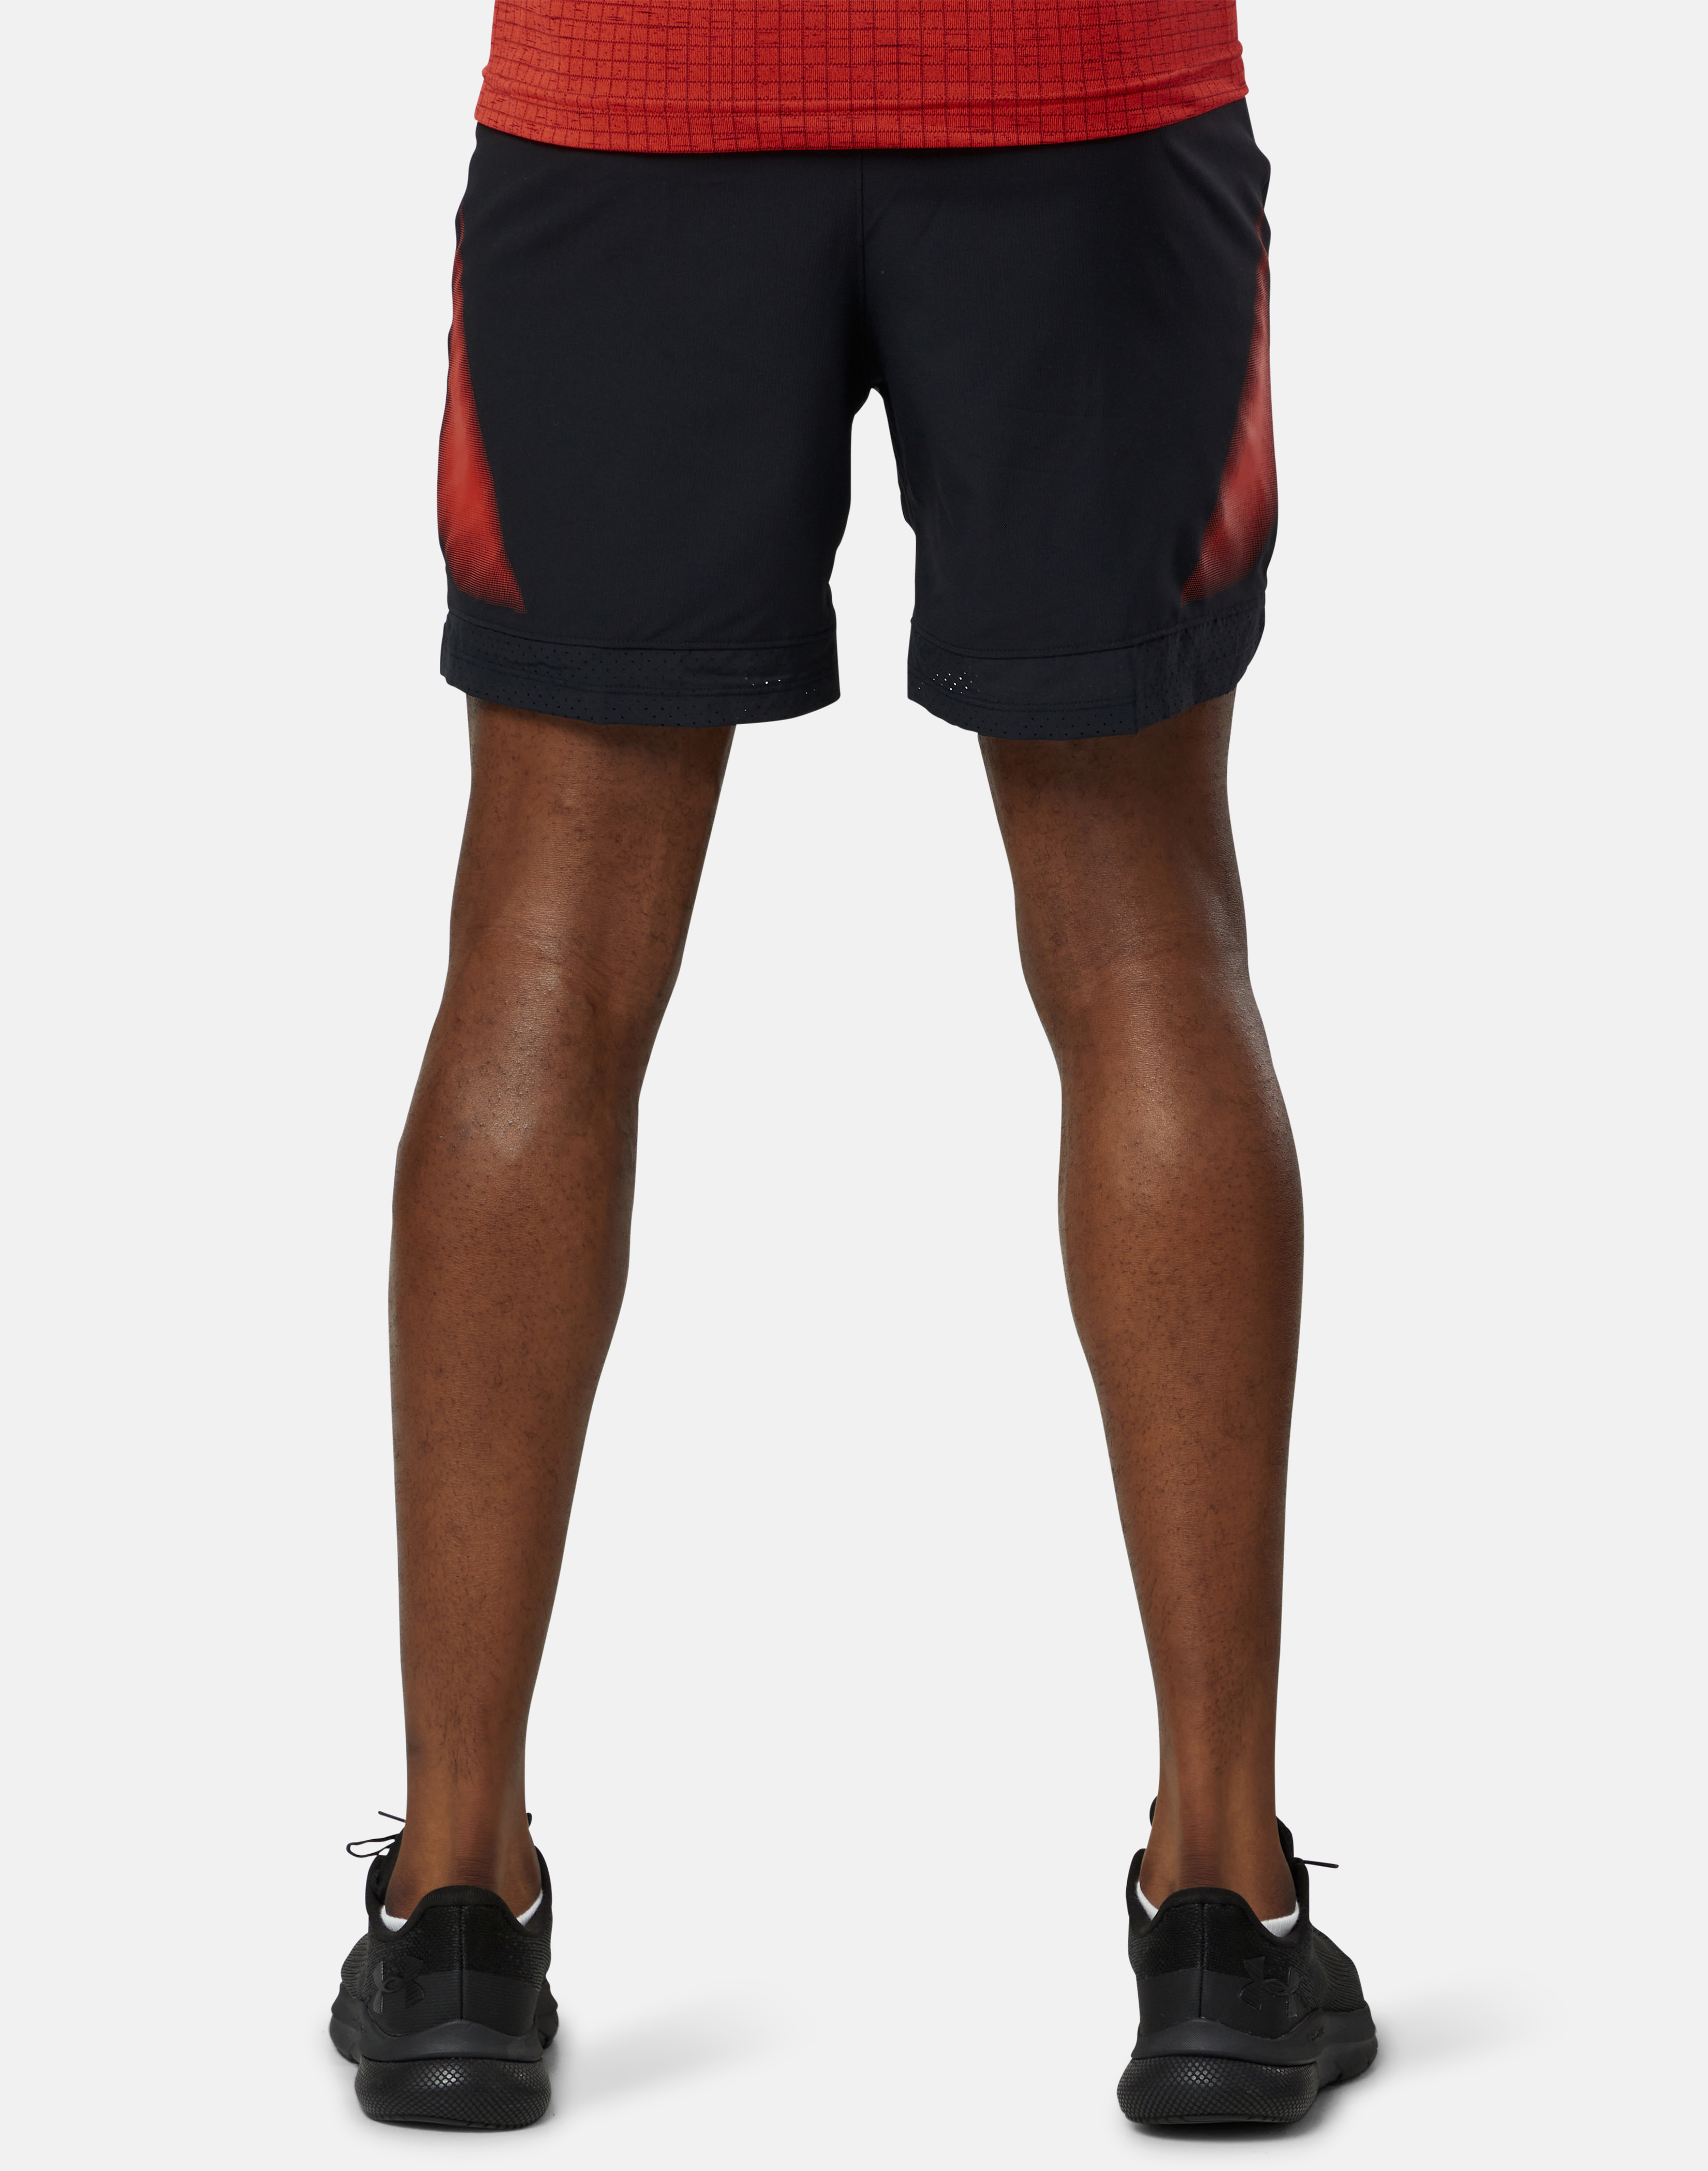 Under Armour Mens Vanish Woven 6 Inch Shorts - Black | Life Style Sports IE